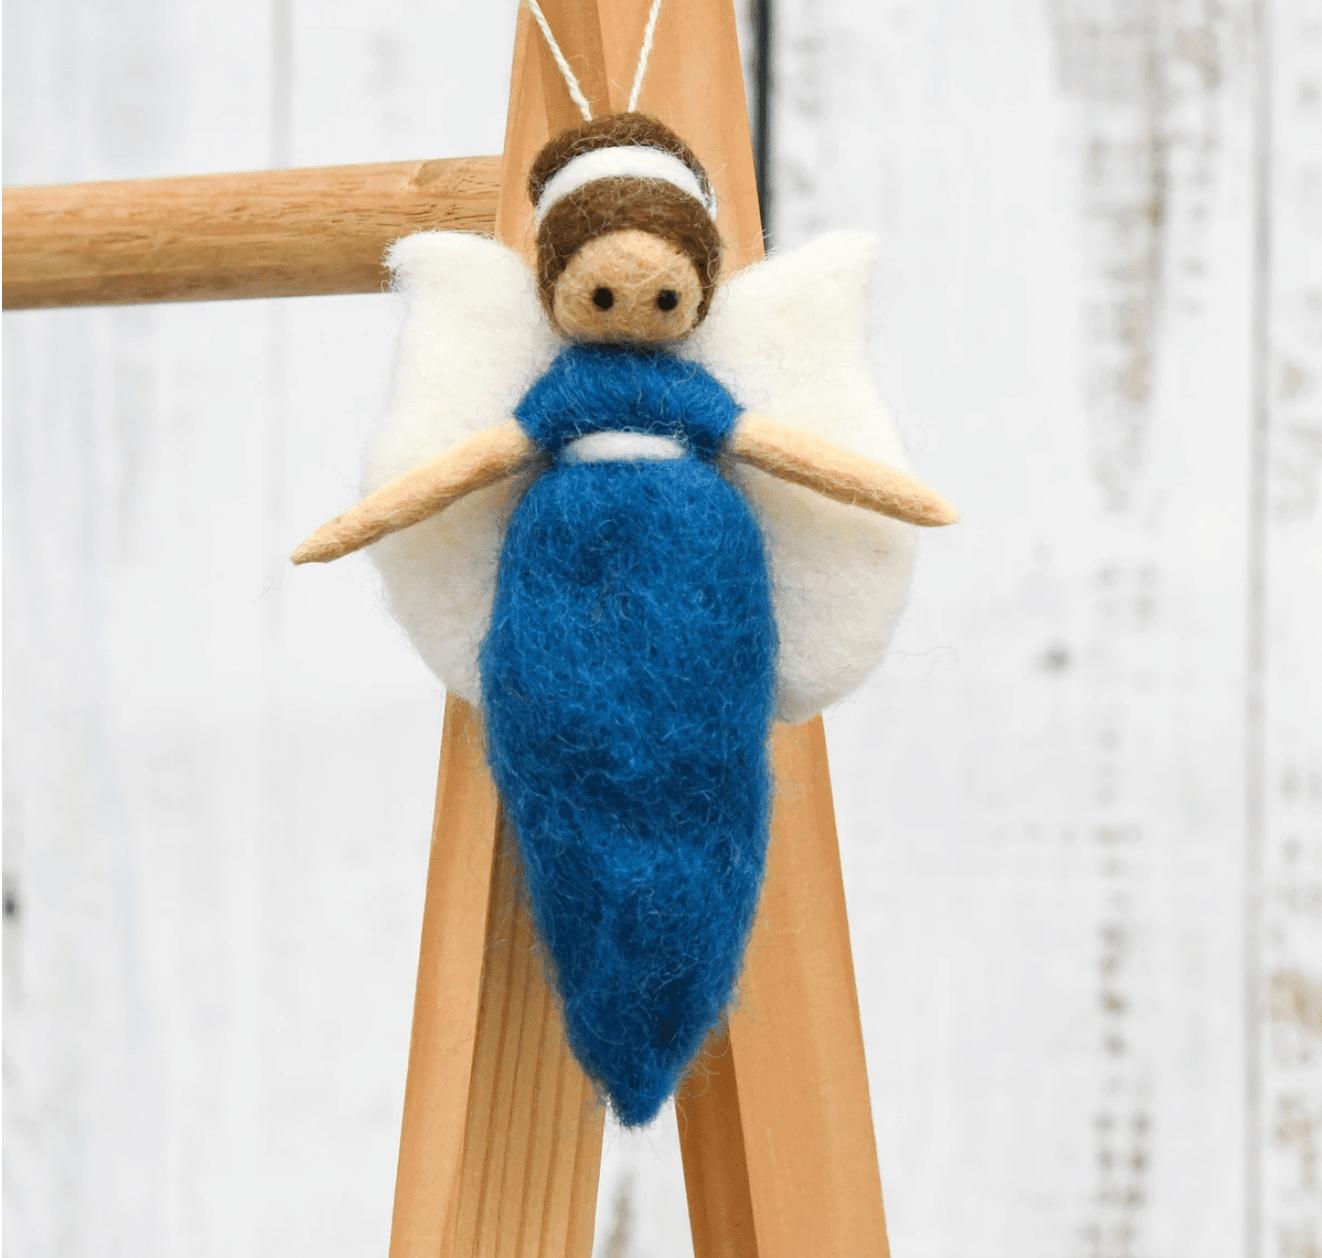 Make a Needle Felted Rattle Ball Toy